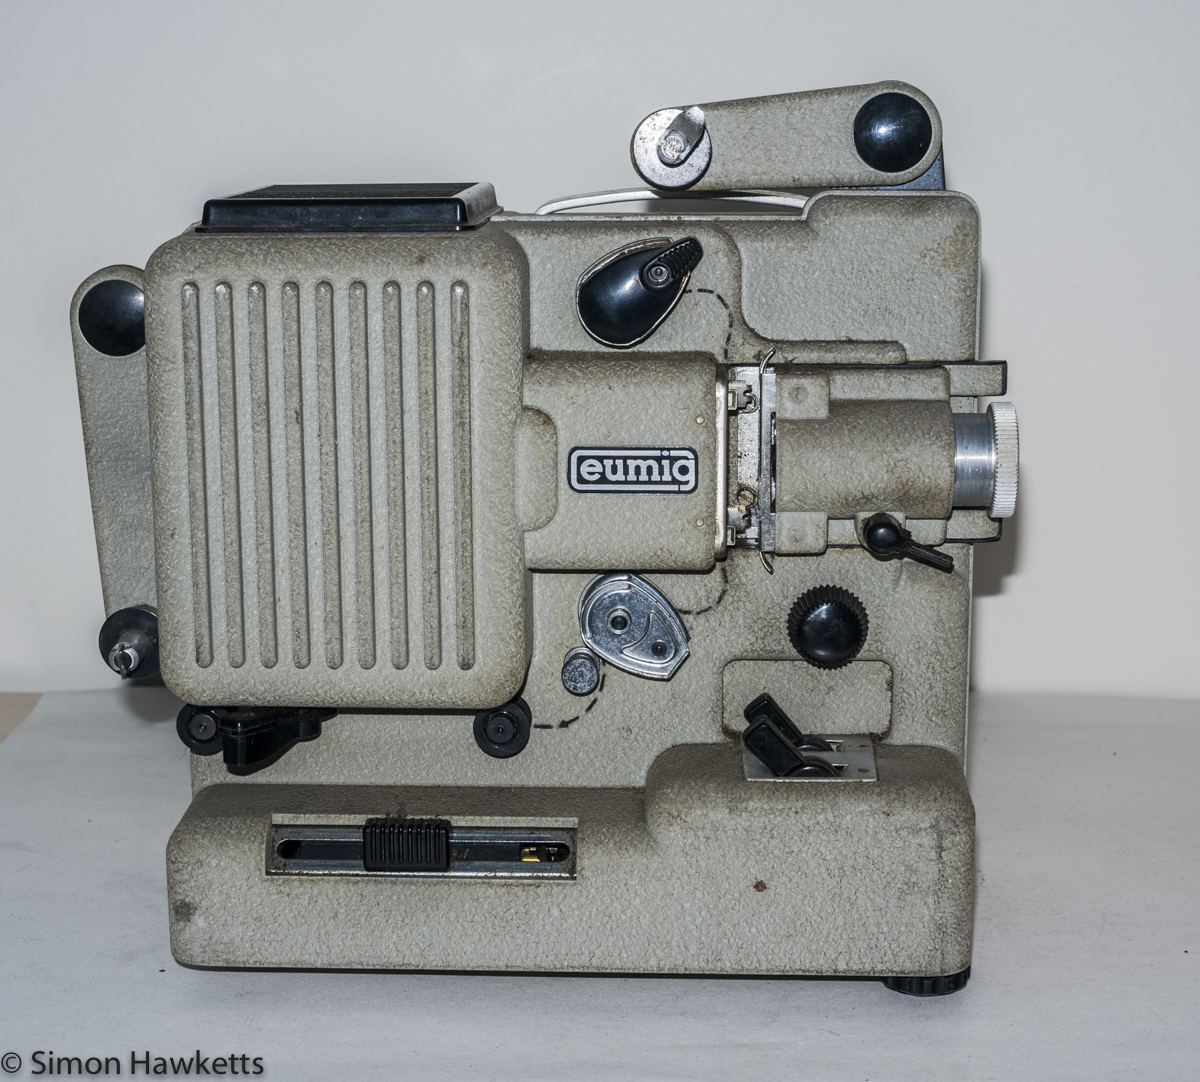 Eumig P8m 8mm Silent Projector - Projection arms folded